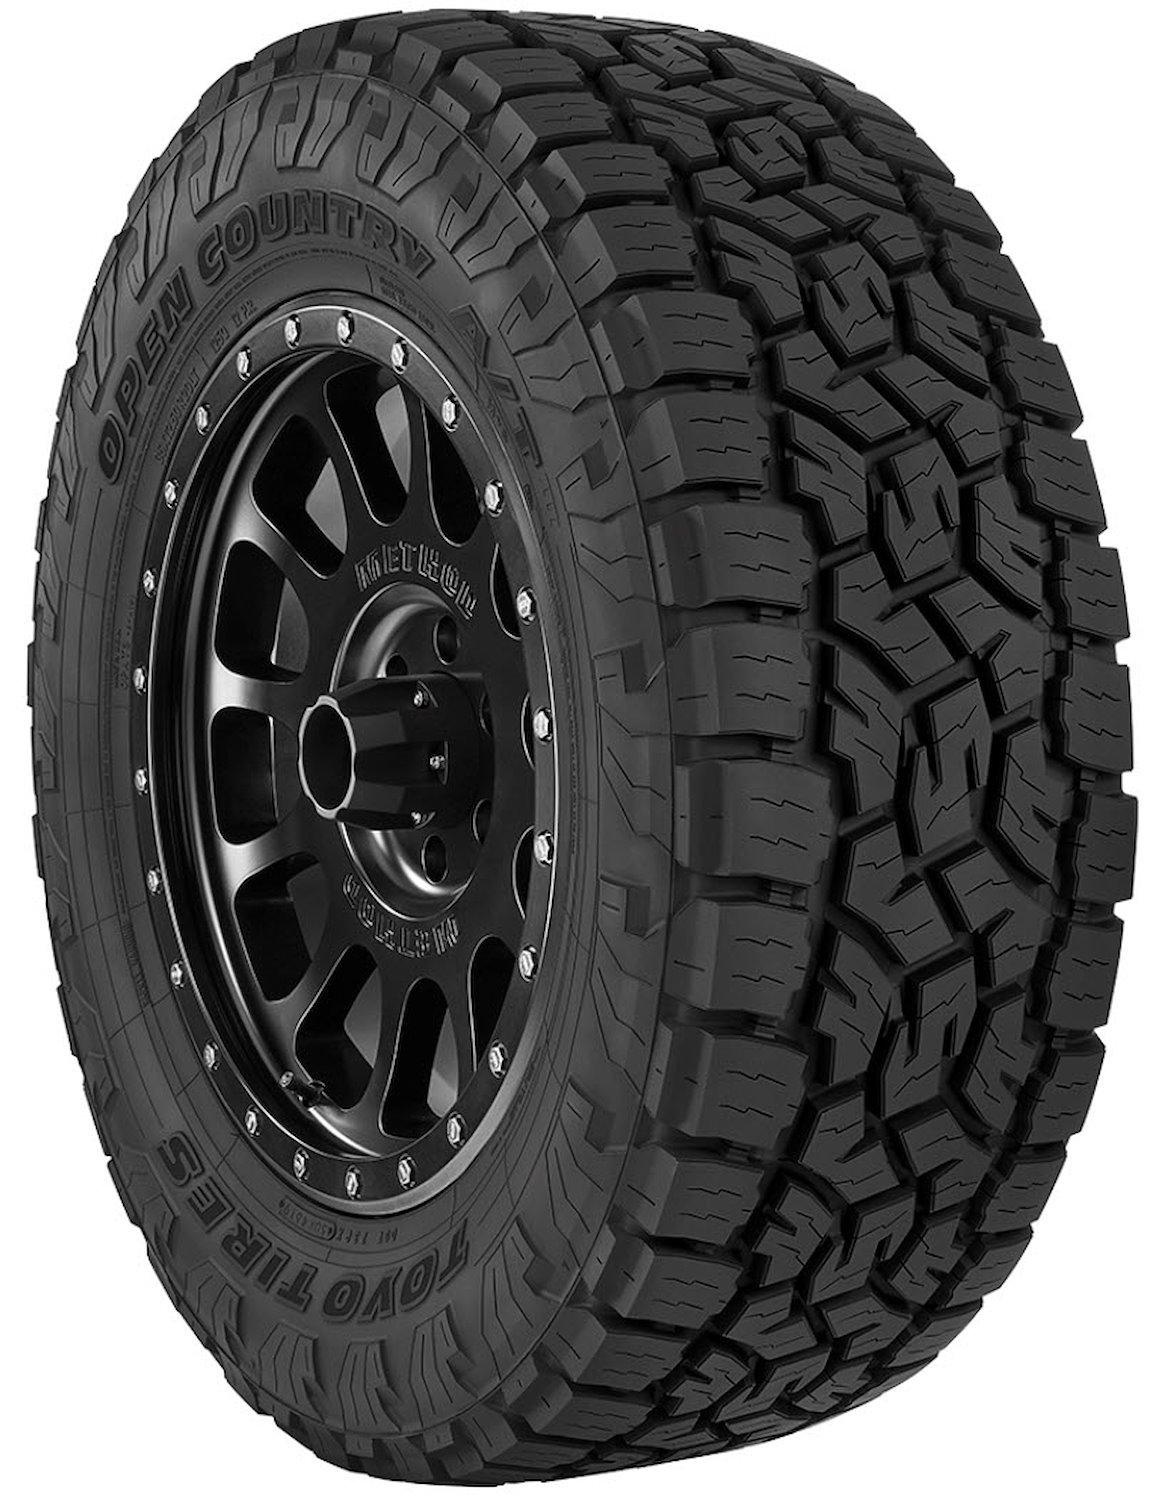 Open Country A/T III Light Truck Radial Tire LT235/80R17